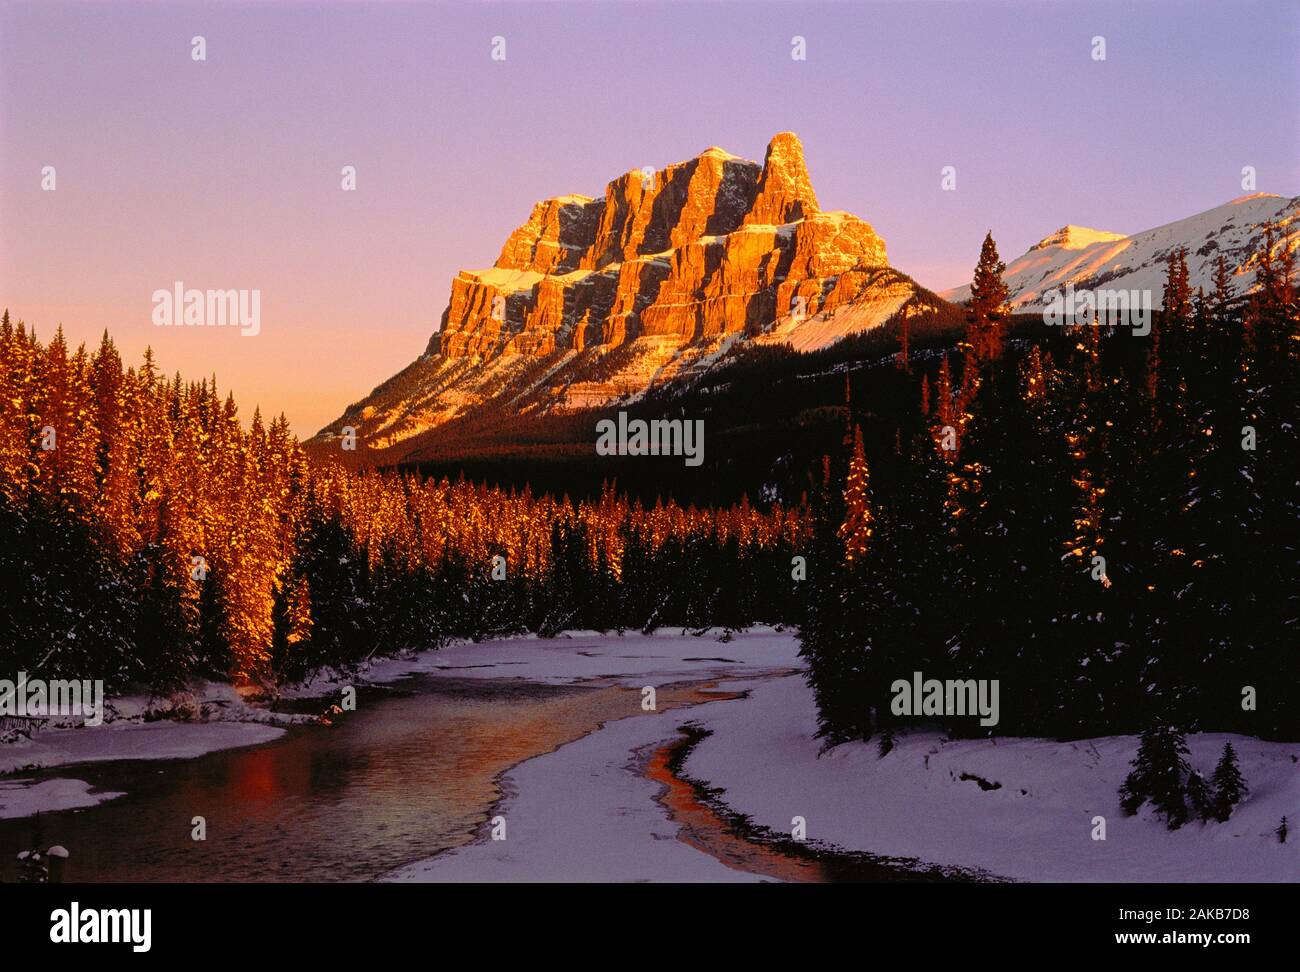 Landscape with Castle Mountain, river and forest in winter at sunset, Banff National Park, Alberta, Canada Stock Photo